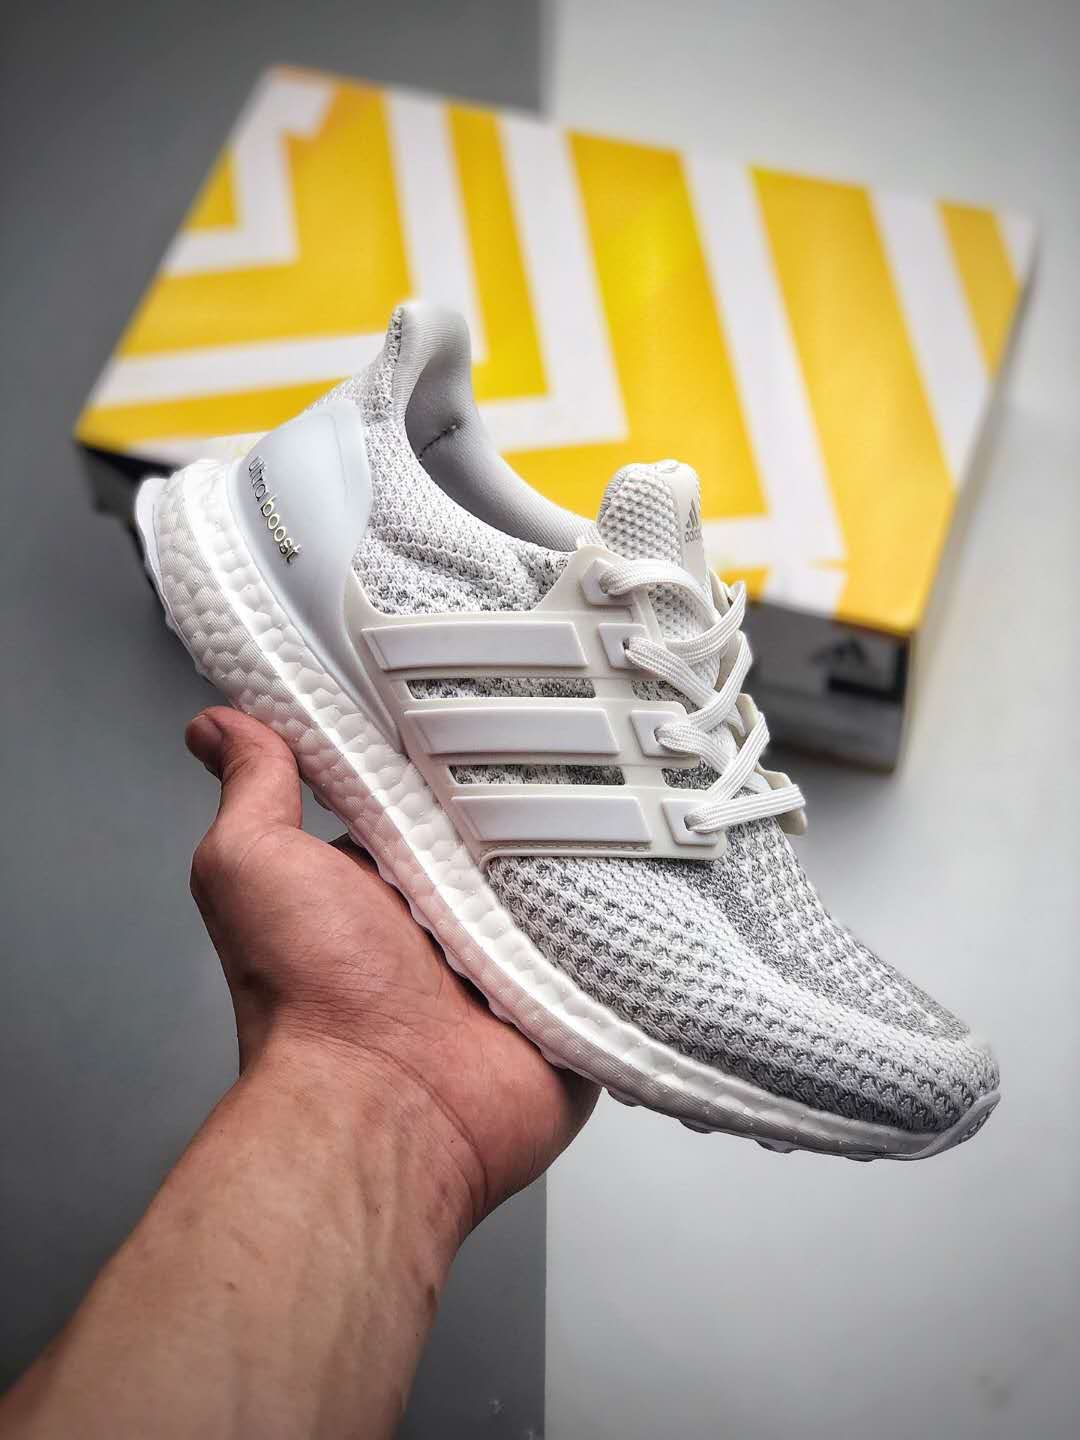 Adidas UltraBoost 2.0 Limited White Reflective - Buy Now!